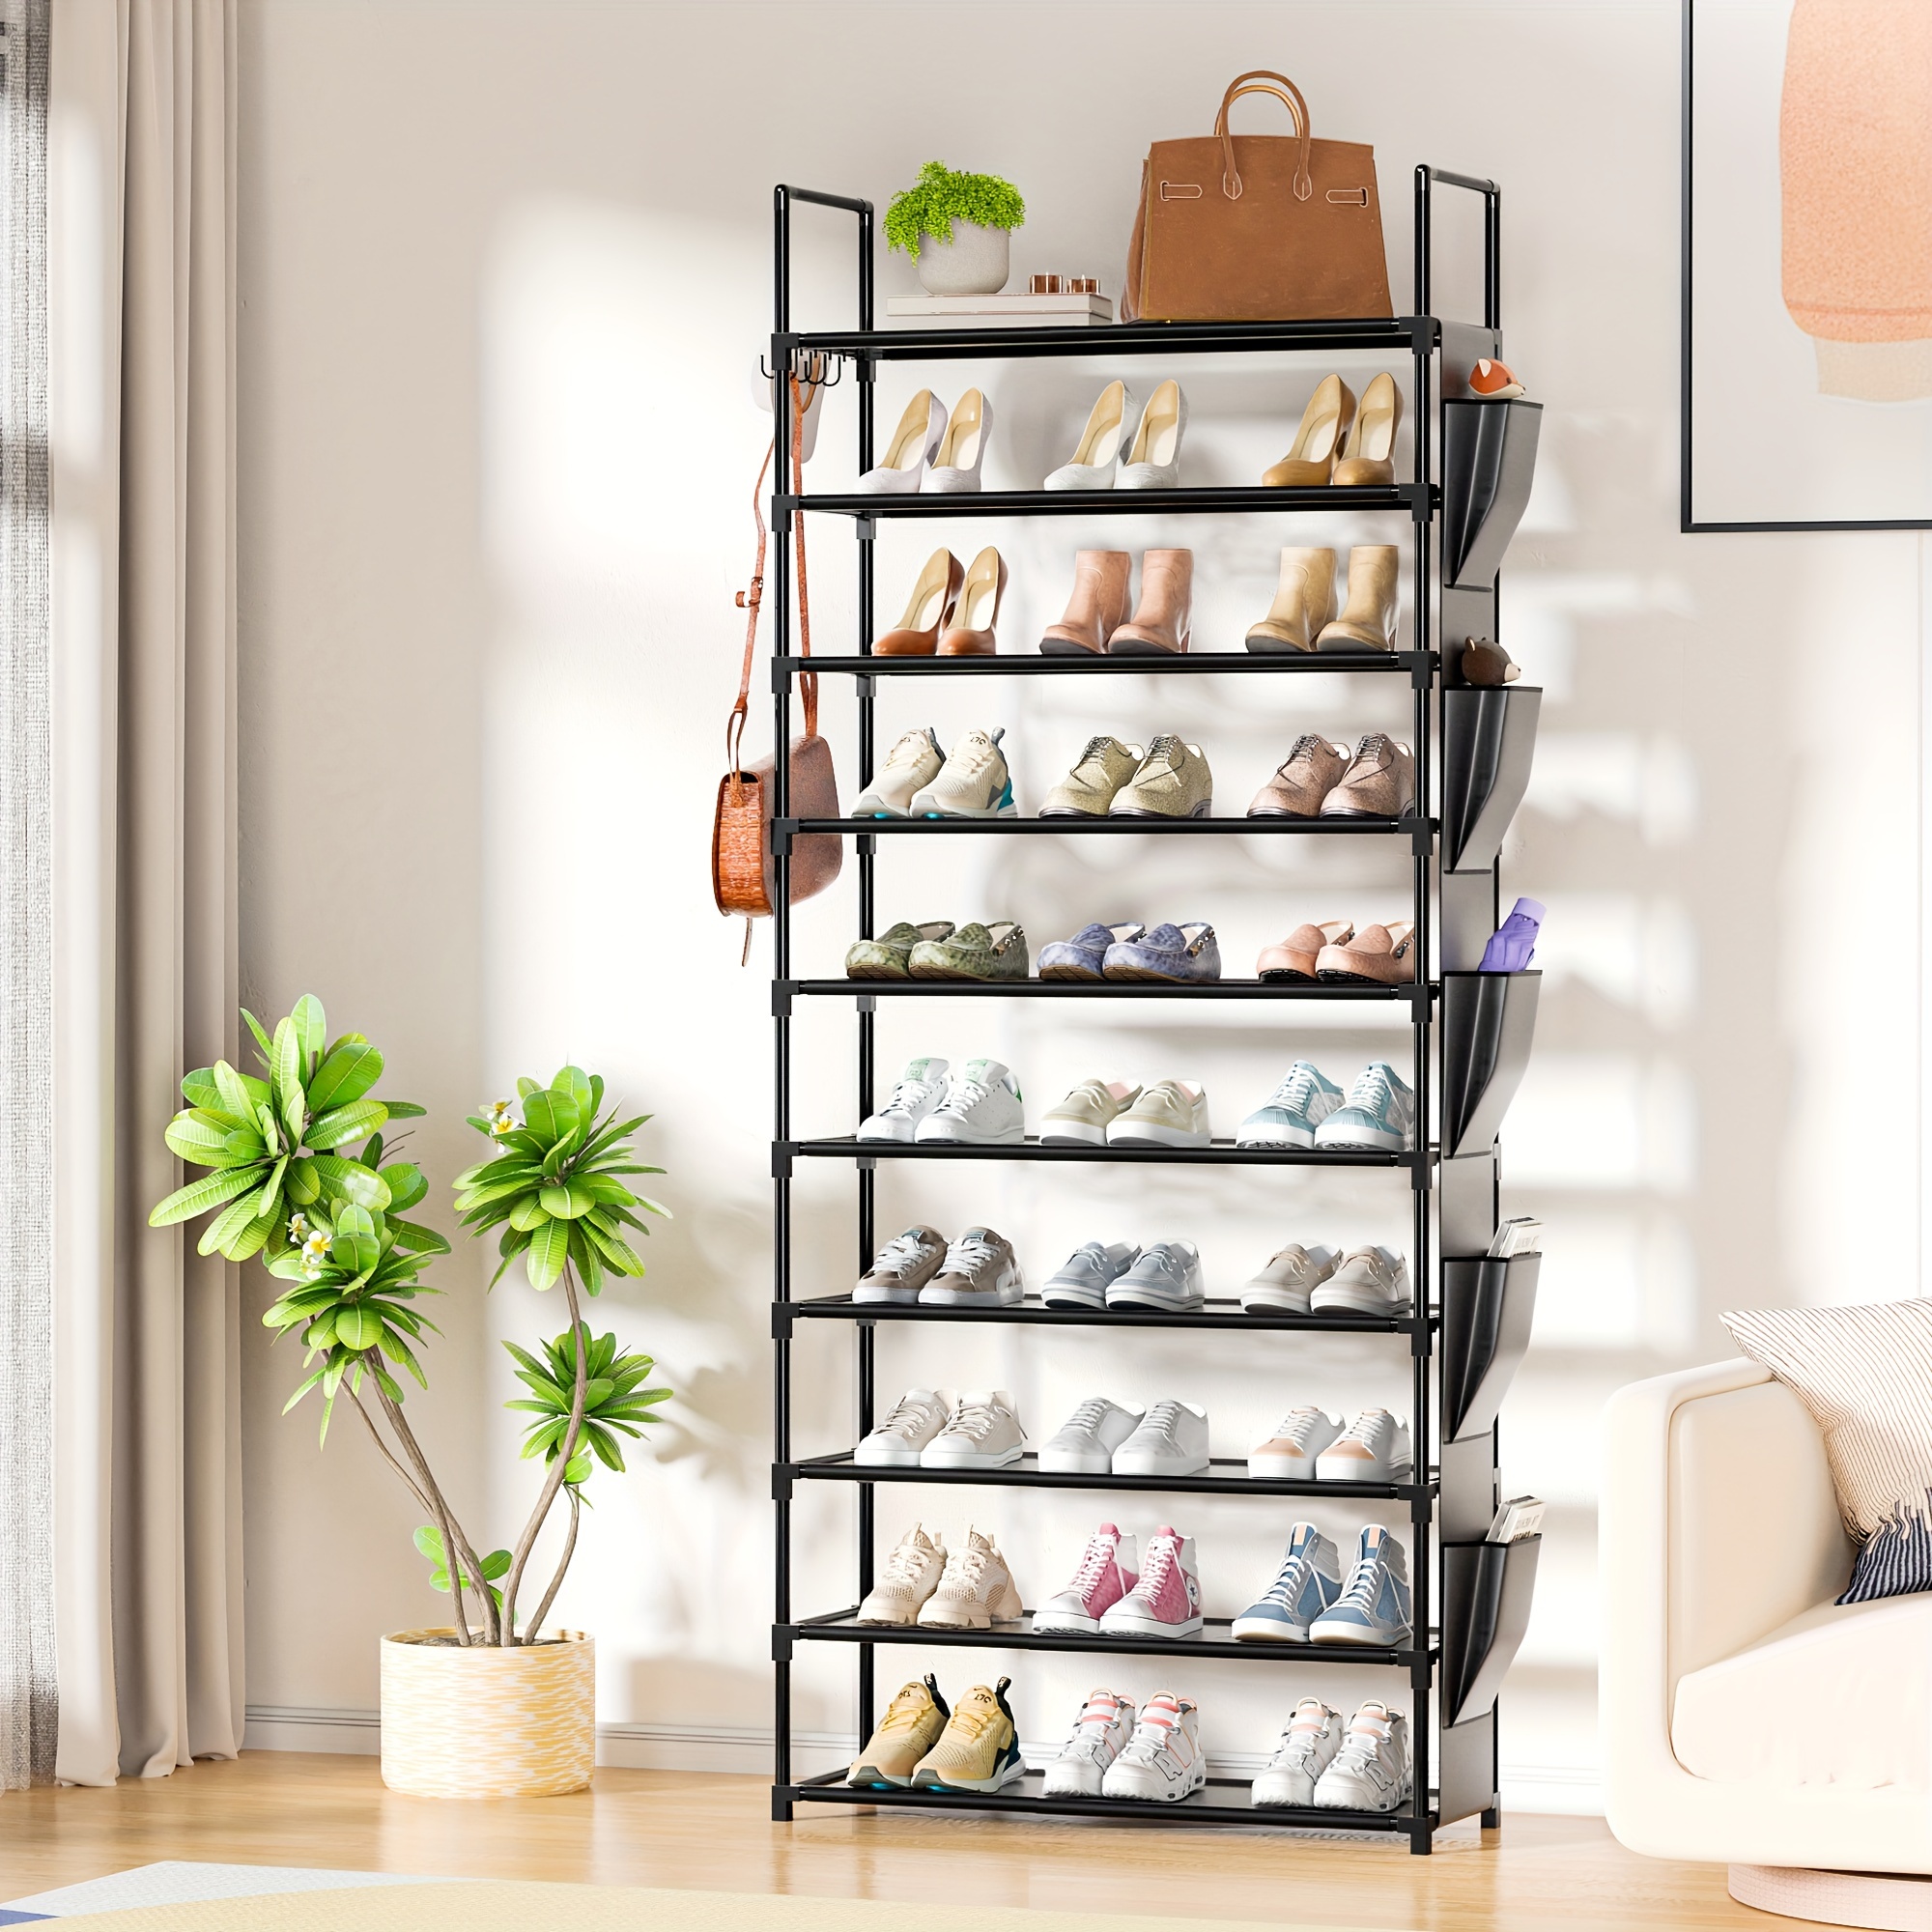 

Tall Shoe Rack For Entryway, 10-tier Sturdy Metal Shoe Shelf Storage Shoes And Boots, Space Saving Corner Shoe Rack Organizer For Closet, Doorway, Garage, Living Room